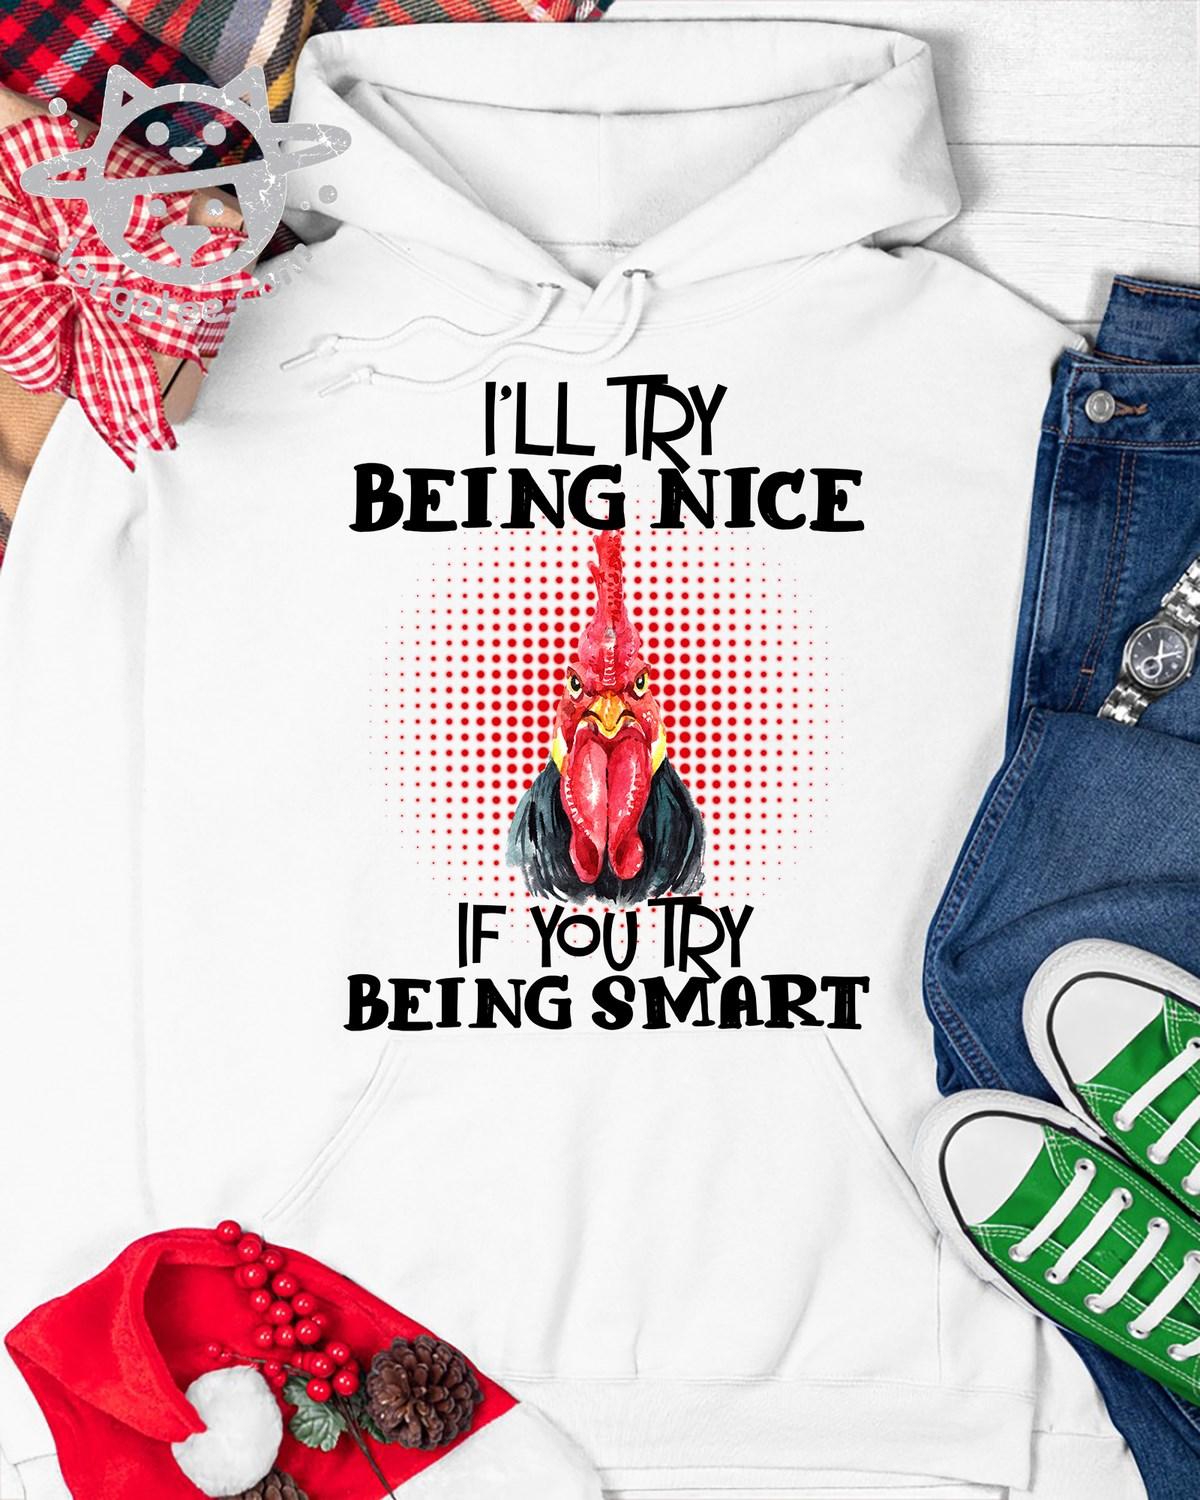 I'll try being nice if you try being smart - Hate stupid people, grumpy chicken